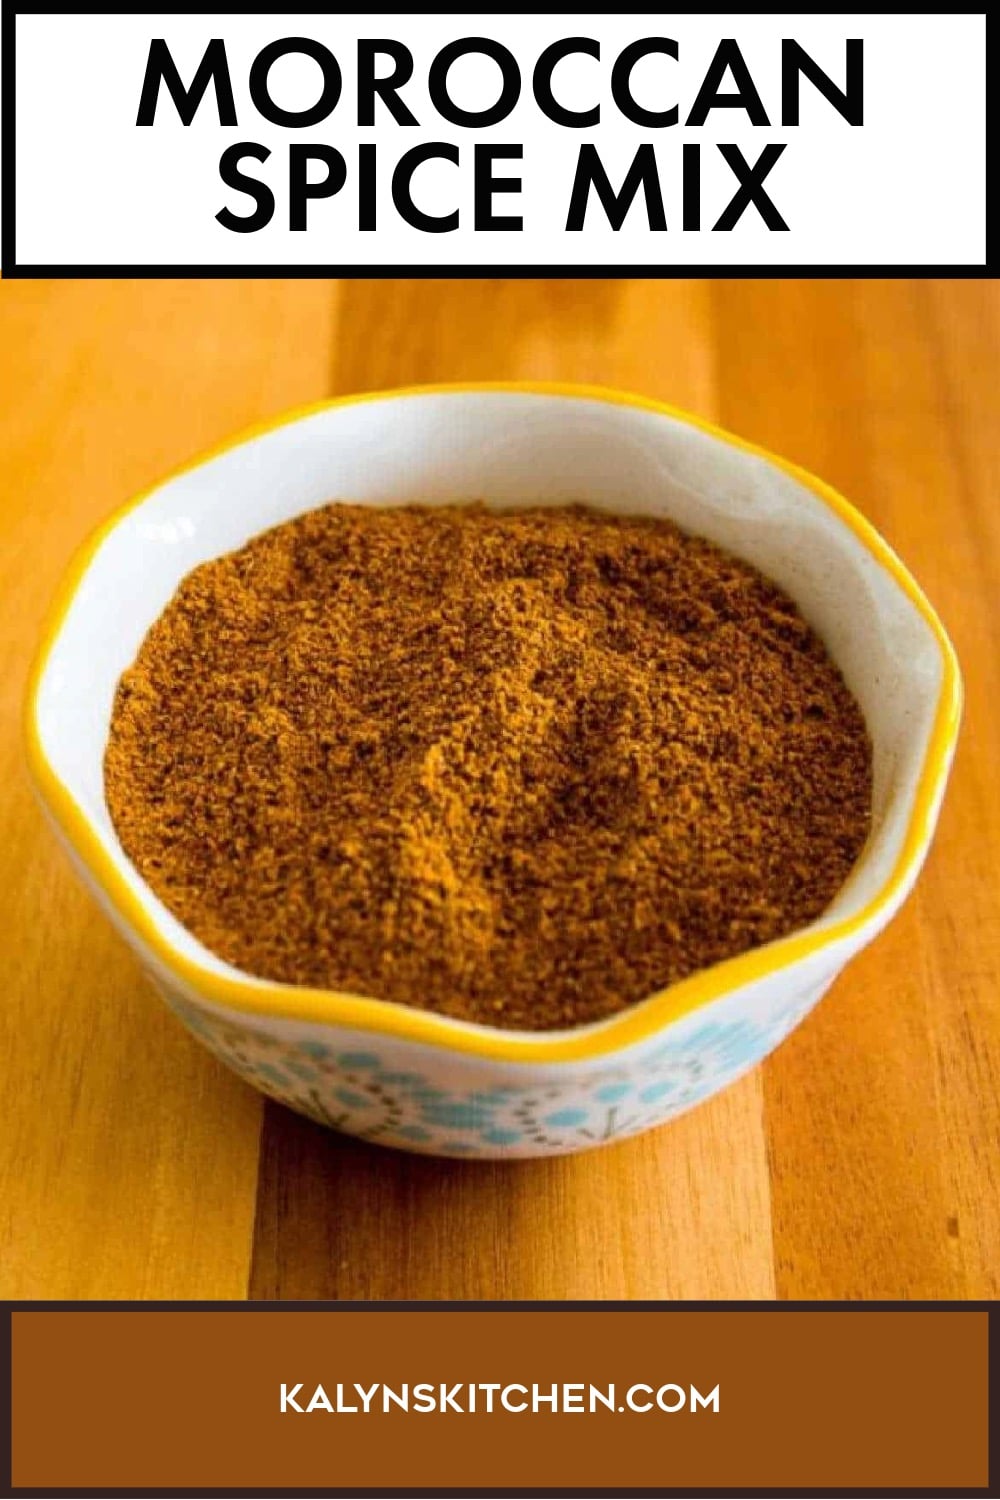 Pinterest image of Moroccan Spice Mix